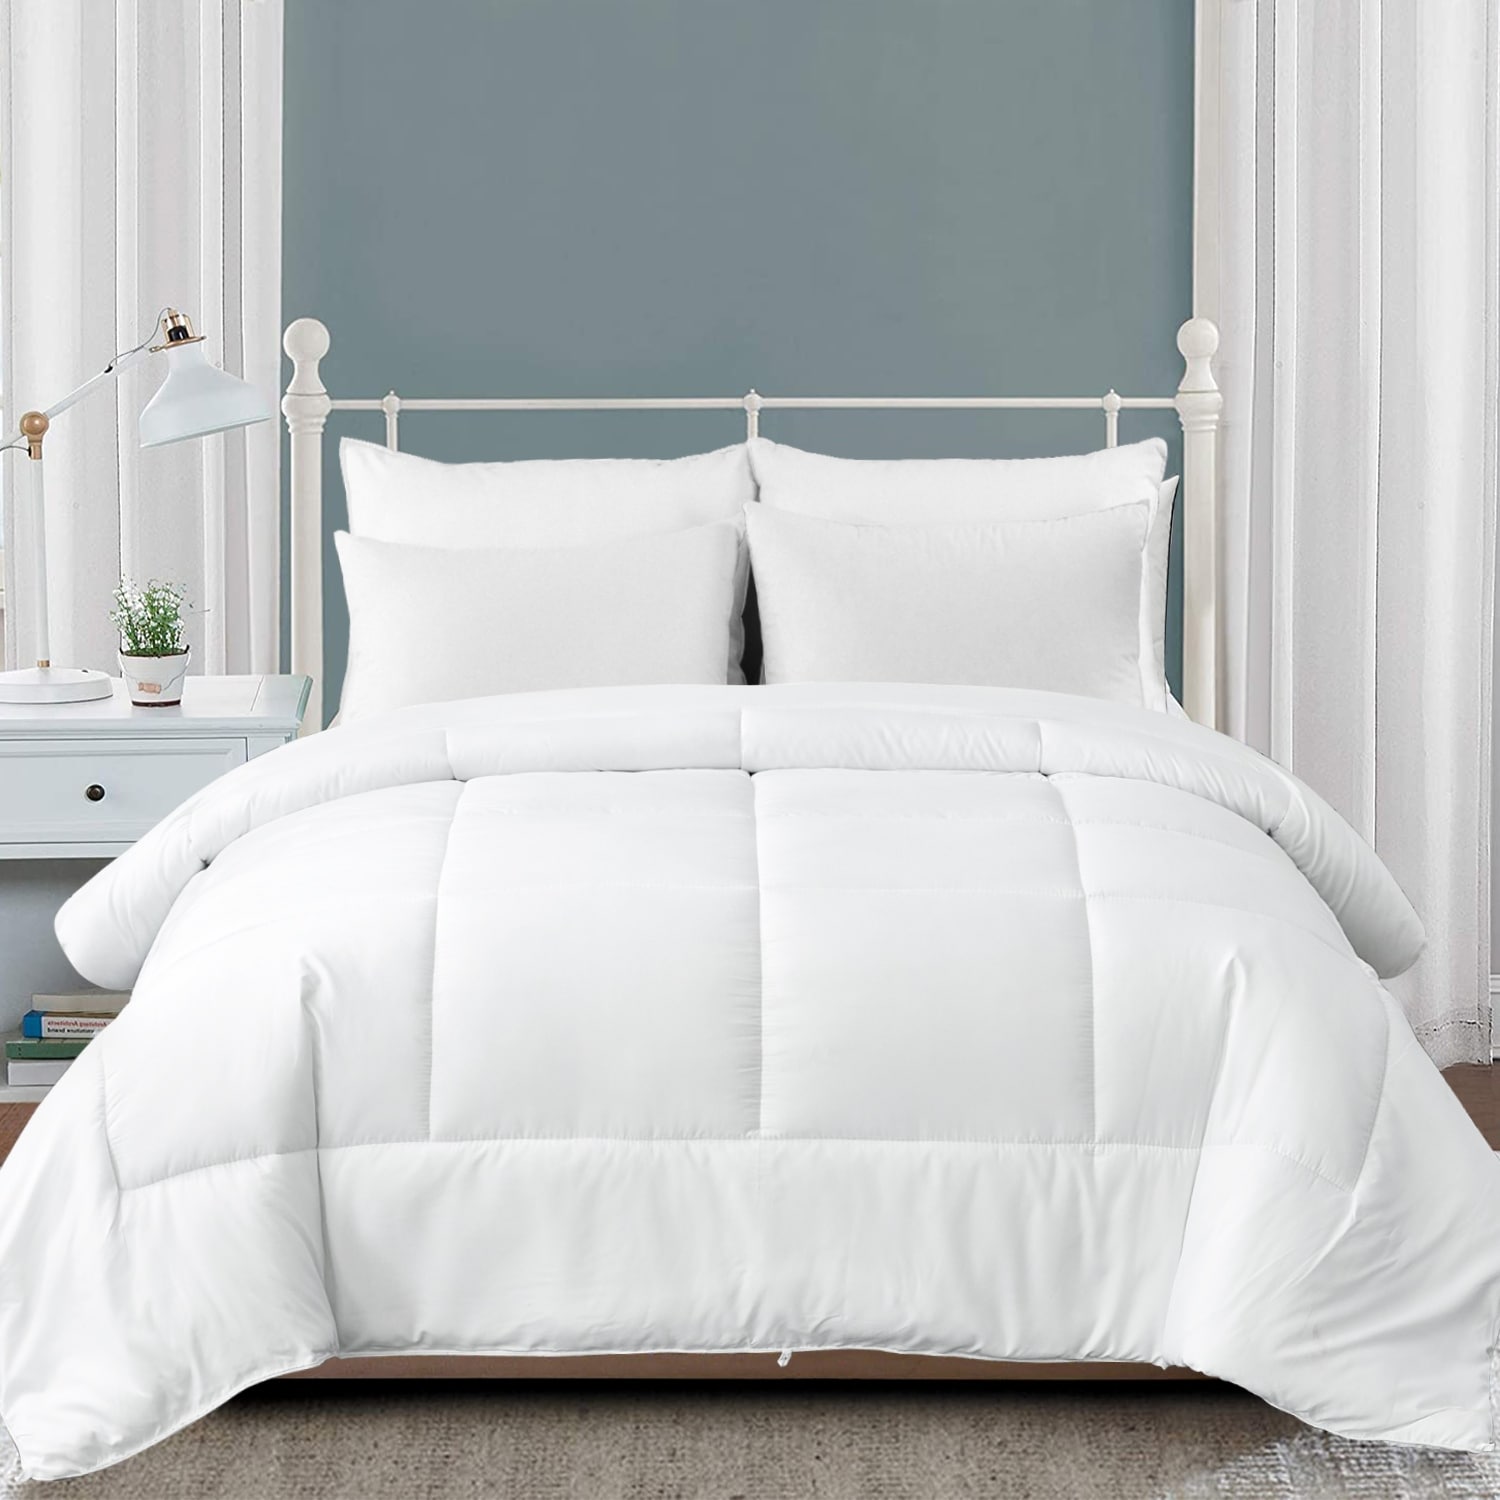 https://ak1.ostkcdn.com/images/products/is/images/direct/b2a9de94185b850fa81fedf78993ea542e074f1c/Lightweight-White-Down-Alternative-Comforter-With-Box.jpg